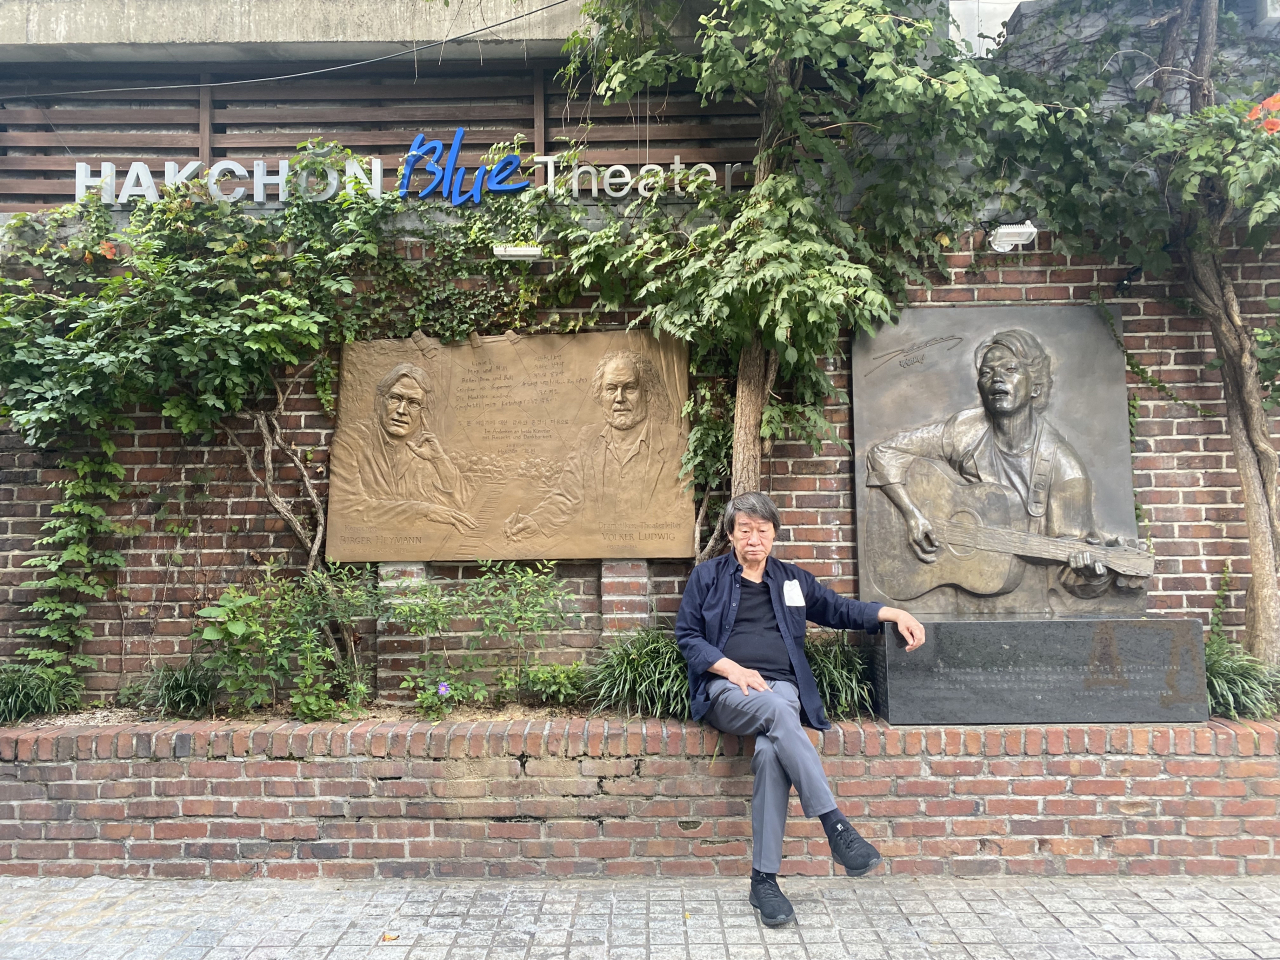 Singer-songwriter Kim Min-gi poses for a photo in front of the Kim Kwang-seok memorial stone at the Hakchon Blue Theater in Jongno-gu, Seoul. (Hakchon)